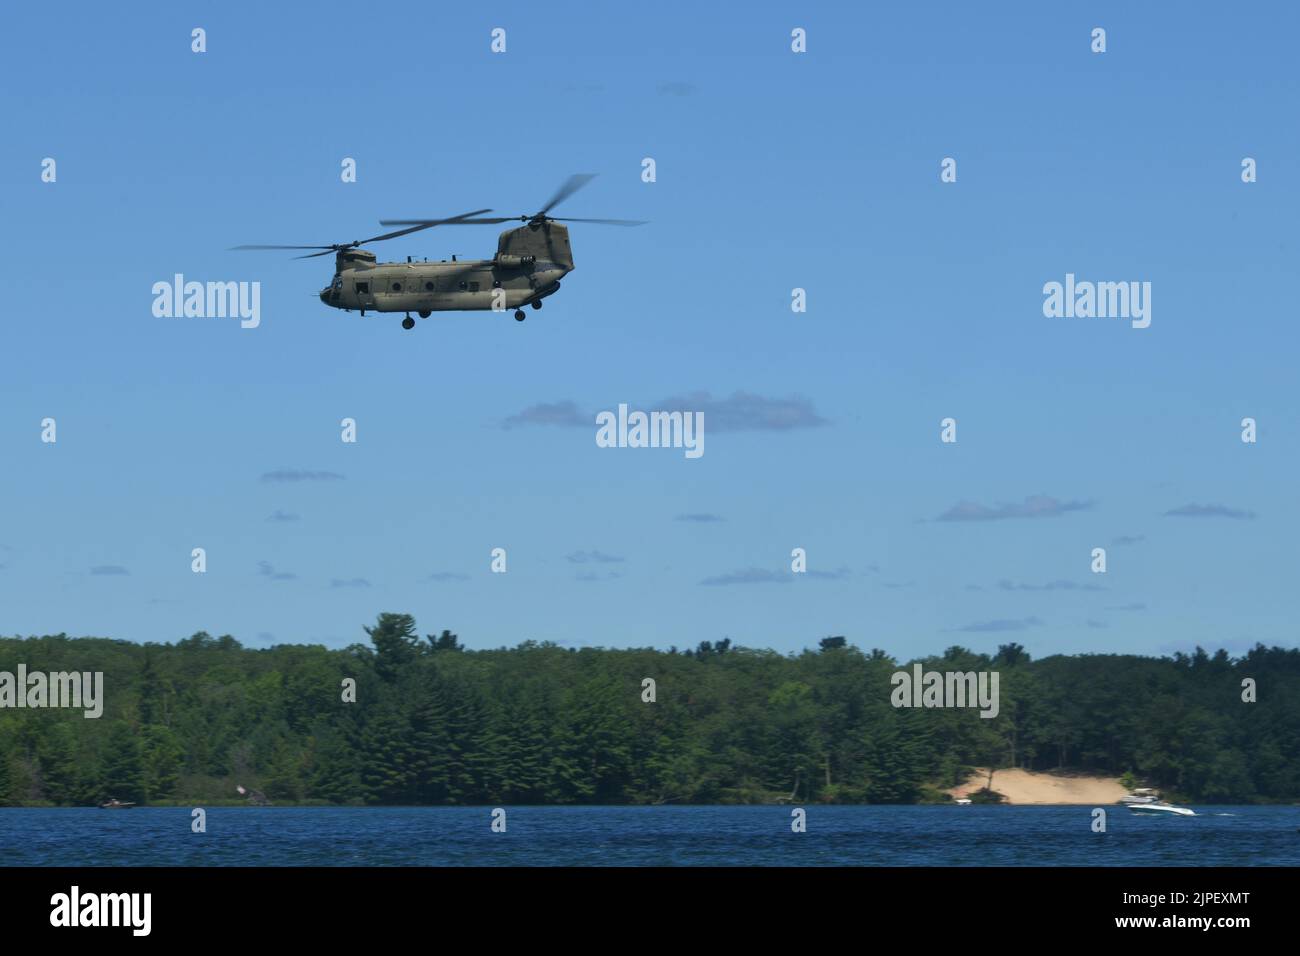 A CH-47 Chinook, 111th General Support Aviation Battalion, Florida Army National Guard, flies over Lake Margrethe during Northern Strike 22-2, at Camp Grayling, Mich., Aug. 11, 2022. Units visiting Northern Strike regularly use Lake Margrethe to conduct littoral operations (U.S. Air National Guard Photo by Staff Sgt. Tristan D. Viglianco) Stock Photo